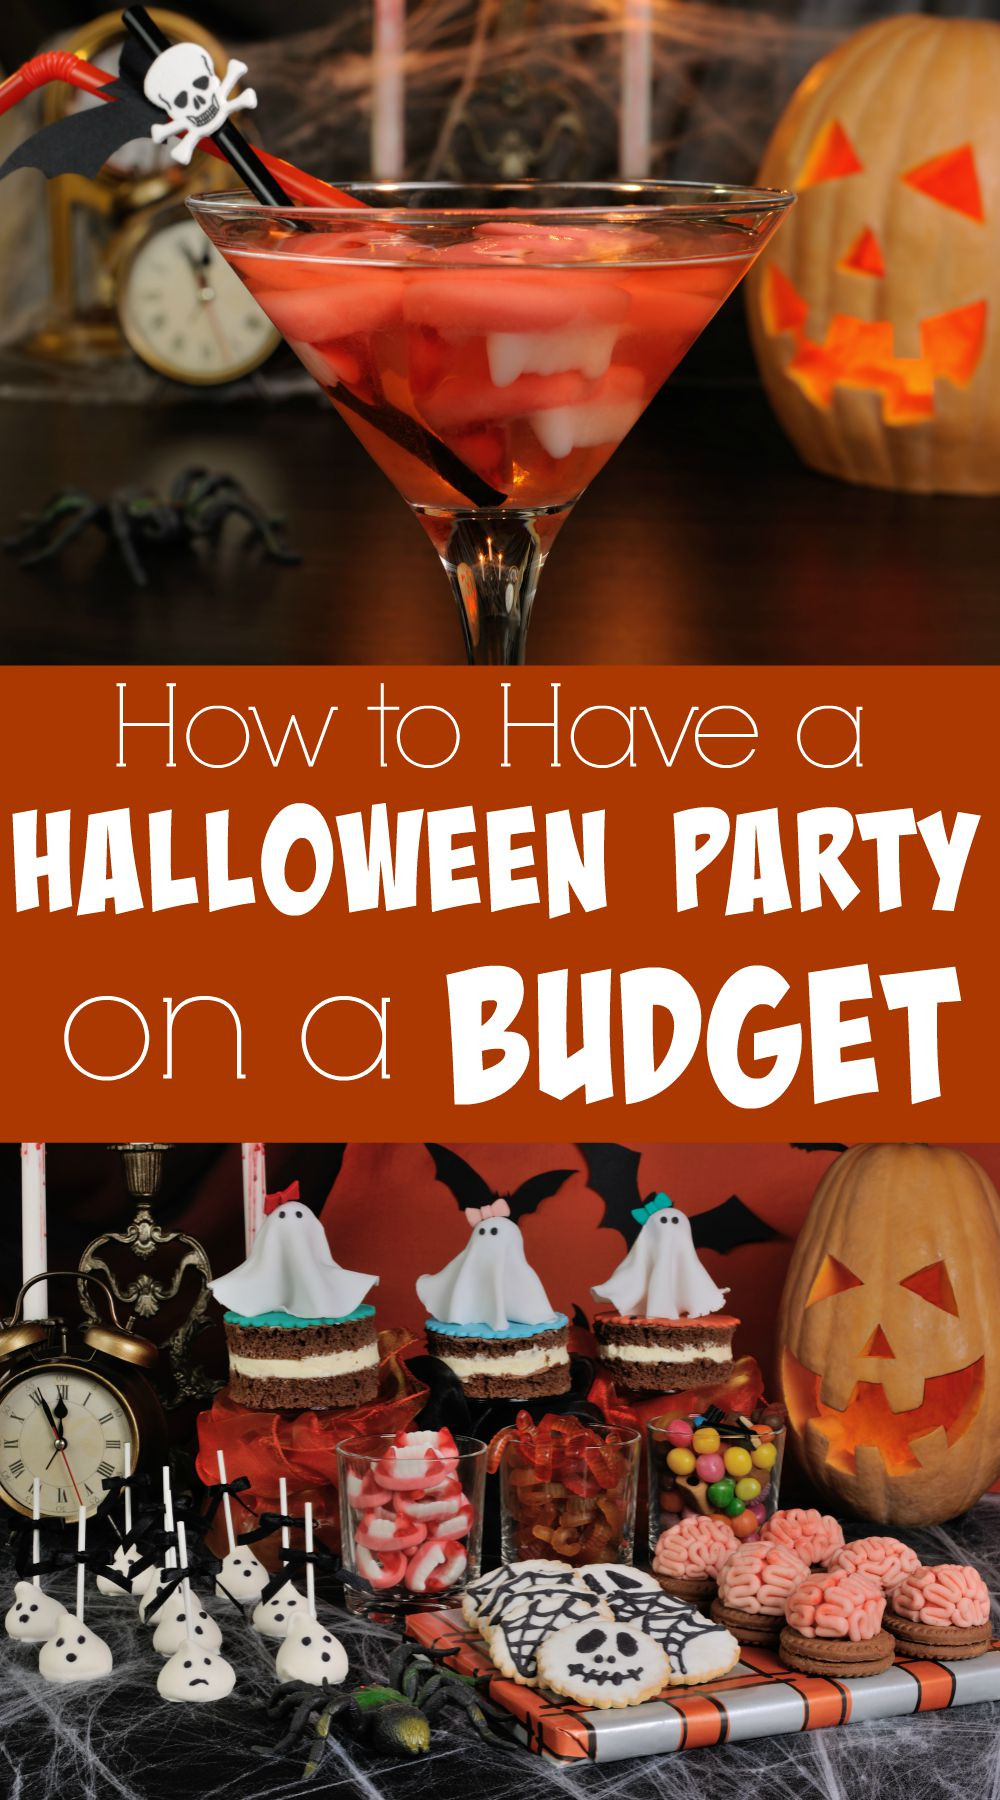 Fun Halloween Party Ideas For Adults
 Halloween Party on a Bud